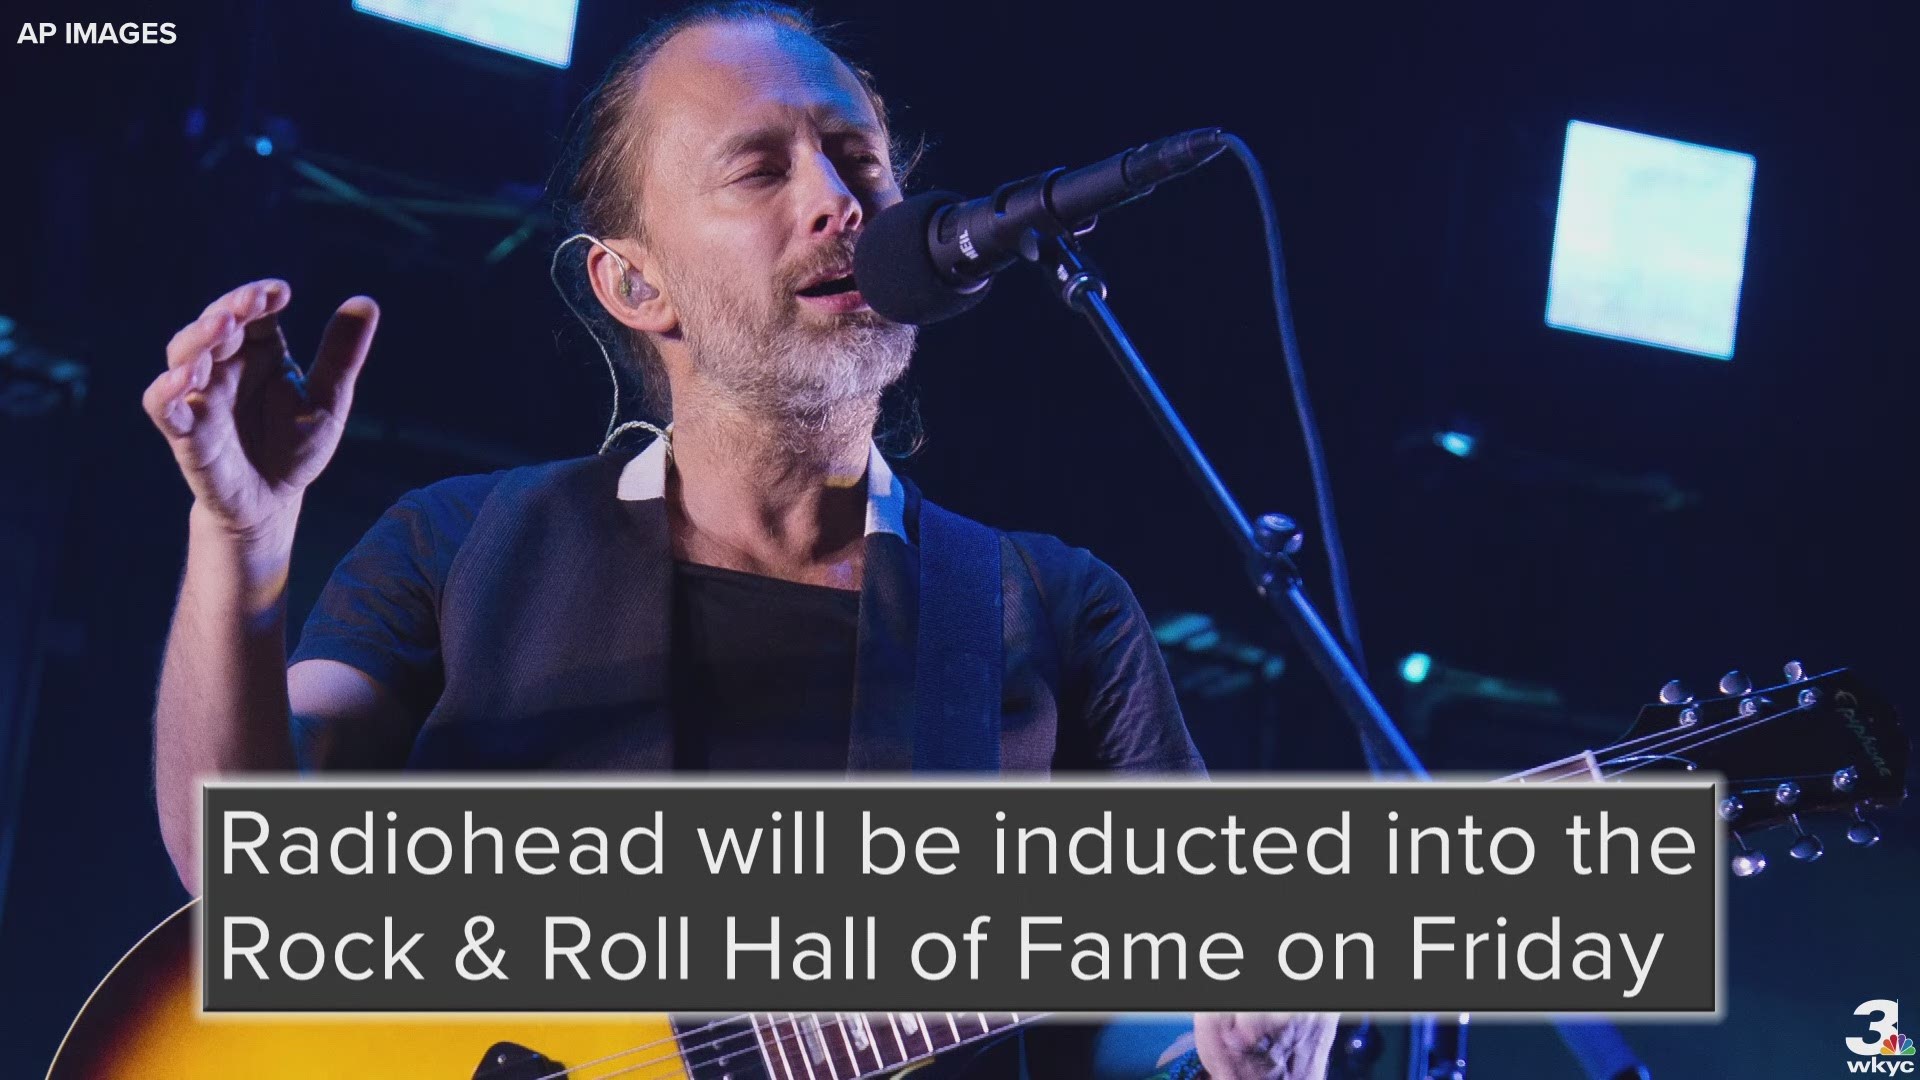 The Rock & Roll Hall of Fame induction ceremony will be held in Brooklyn, New York at the Barclays Center